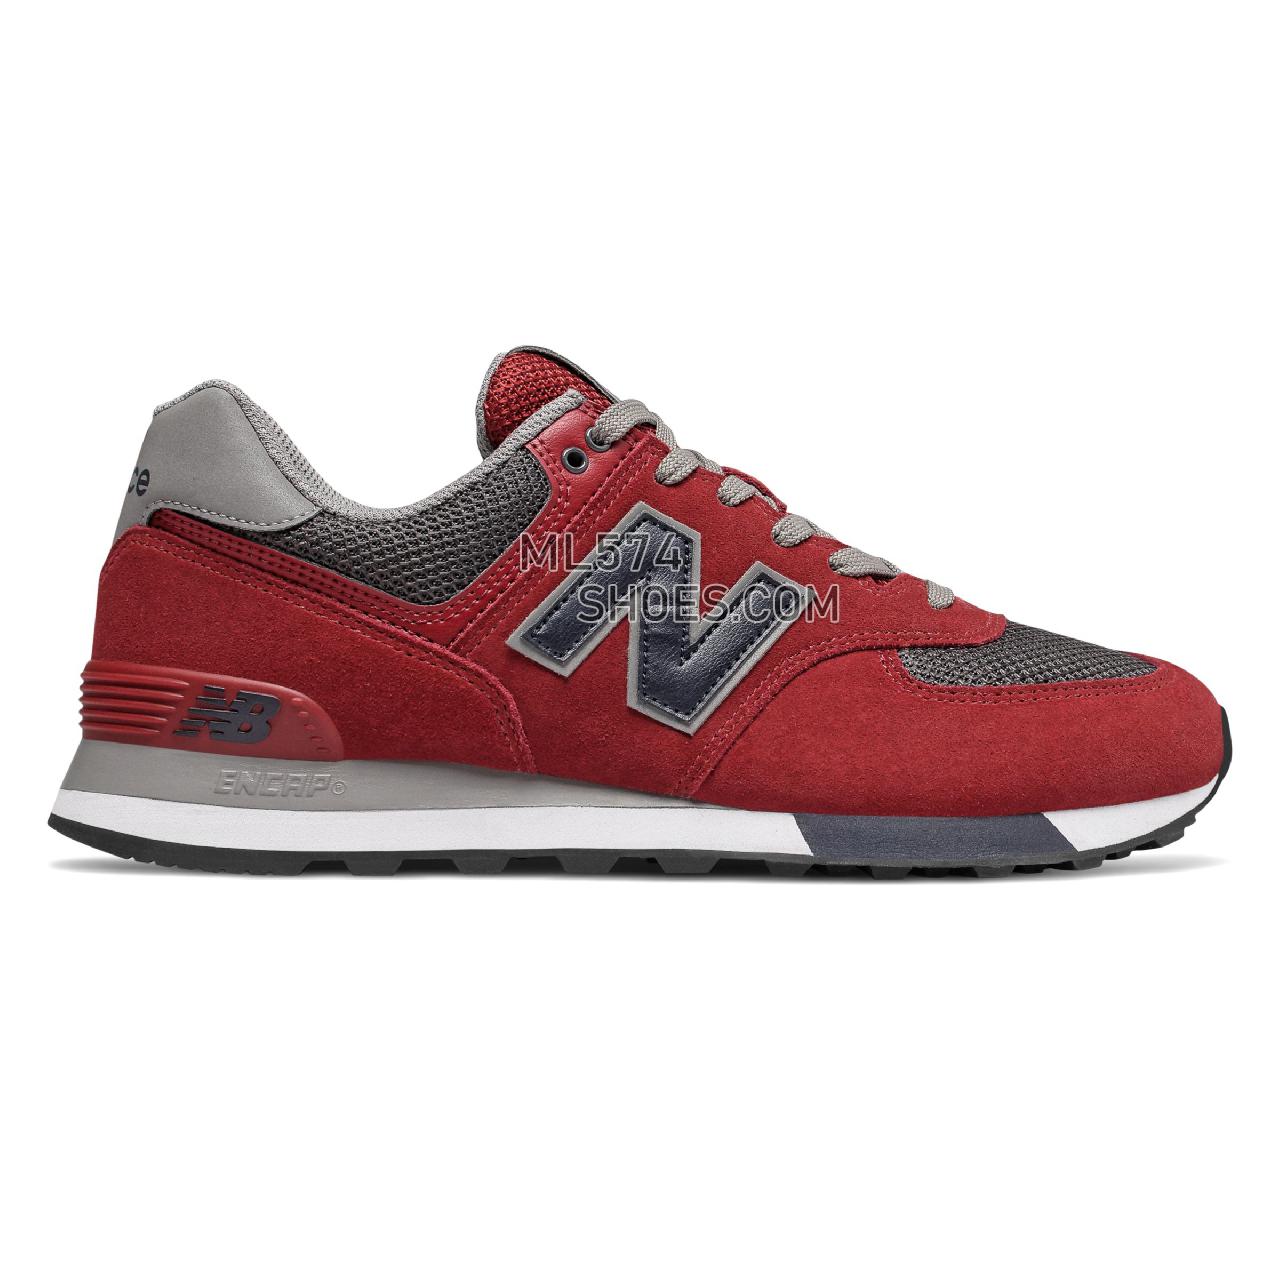 New Balance 574 - Men's 574 - Scarlet with Pigment - ML574FNB